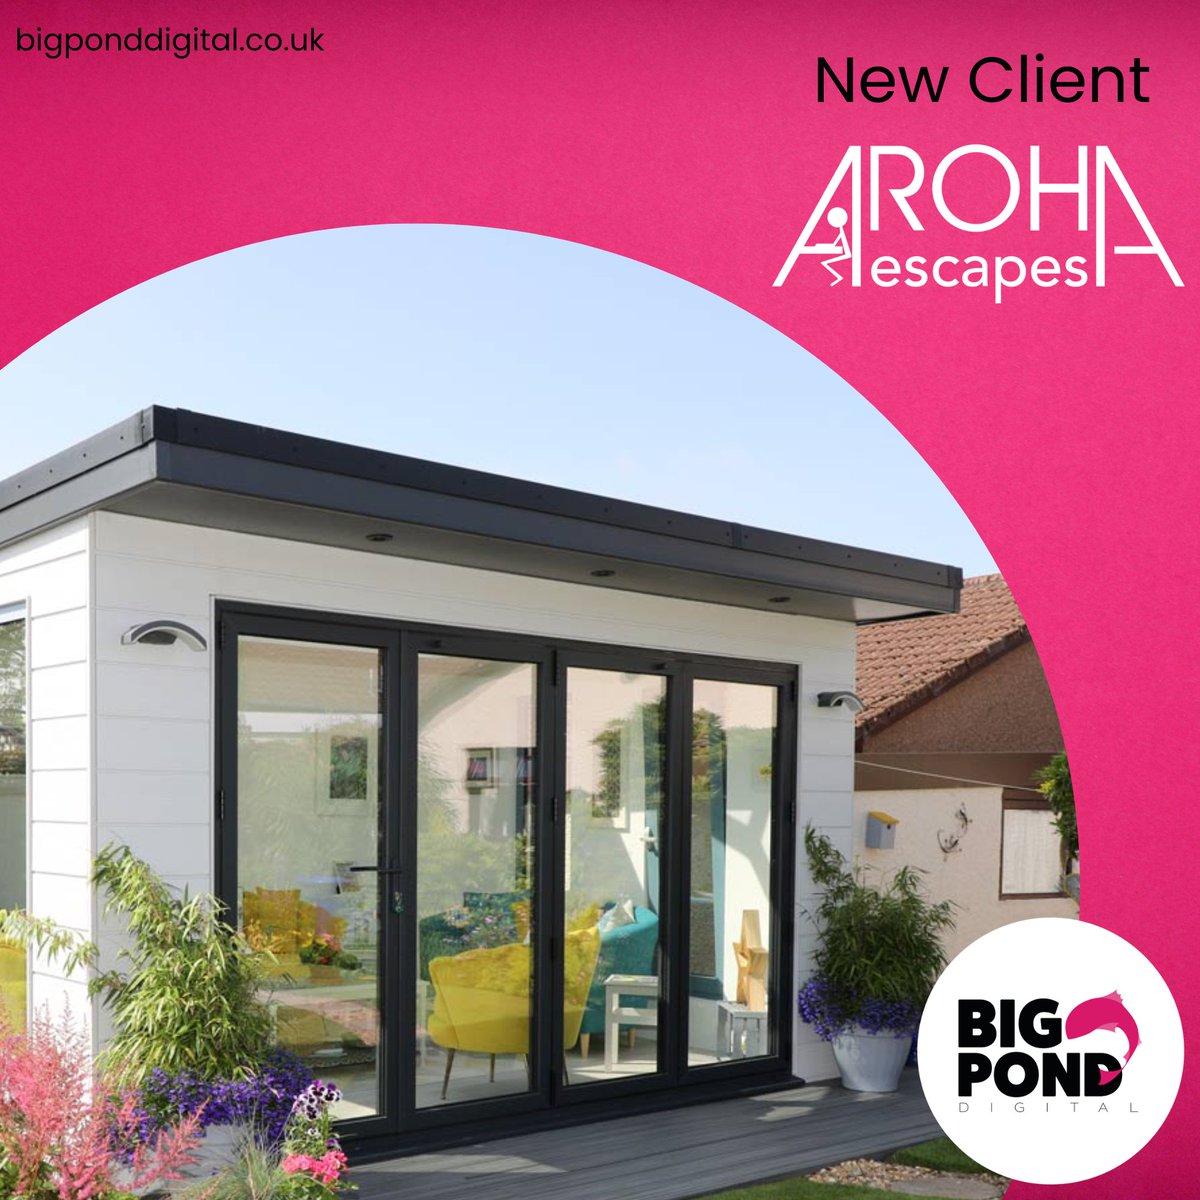 We'd like to welcome Aroha Escapes, our new client.
Based in Stevenson, they specialise in garden rooms and modular buildings. We look forward to getting stuck in.
Head over to their site:
arohaescapes.co.uk

#modularbuilding #modularconstruction #gardenrooms #gardenoffice